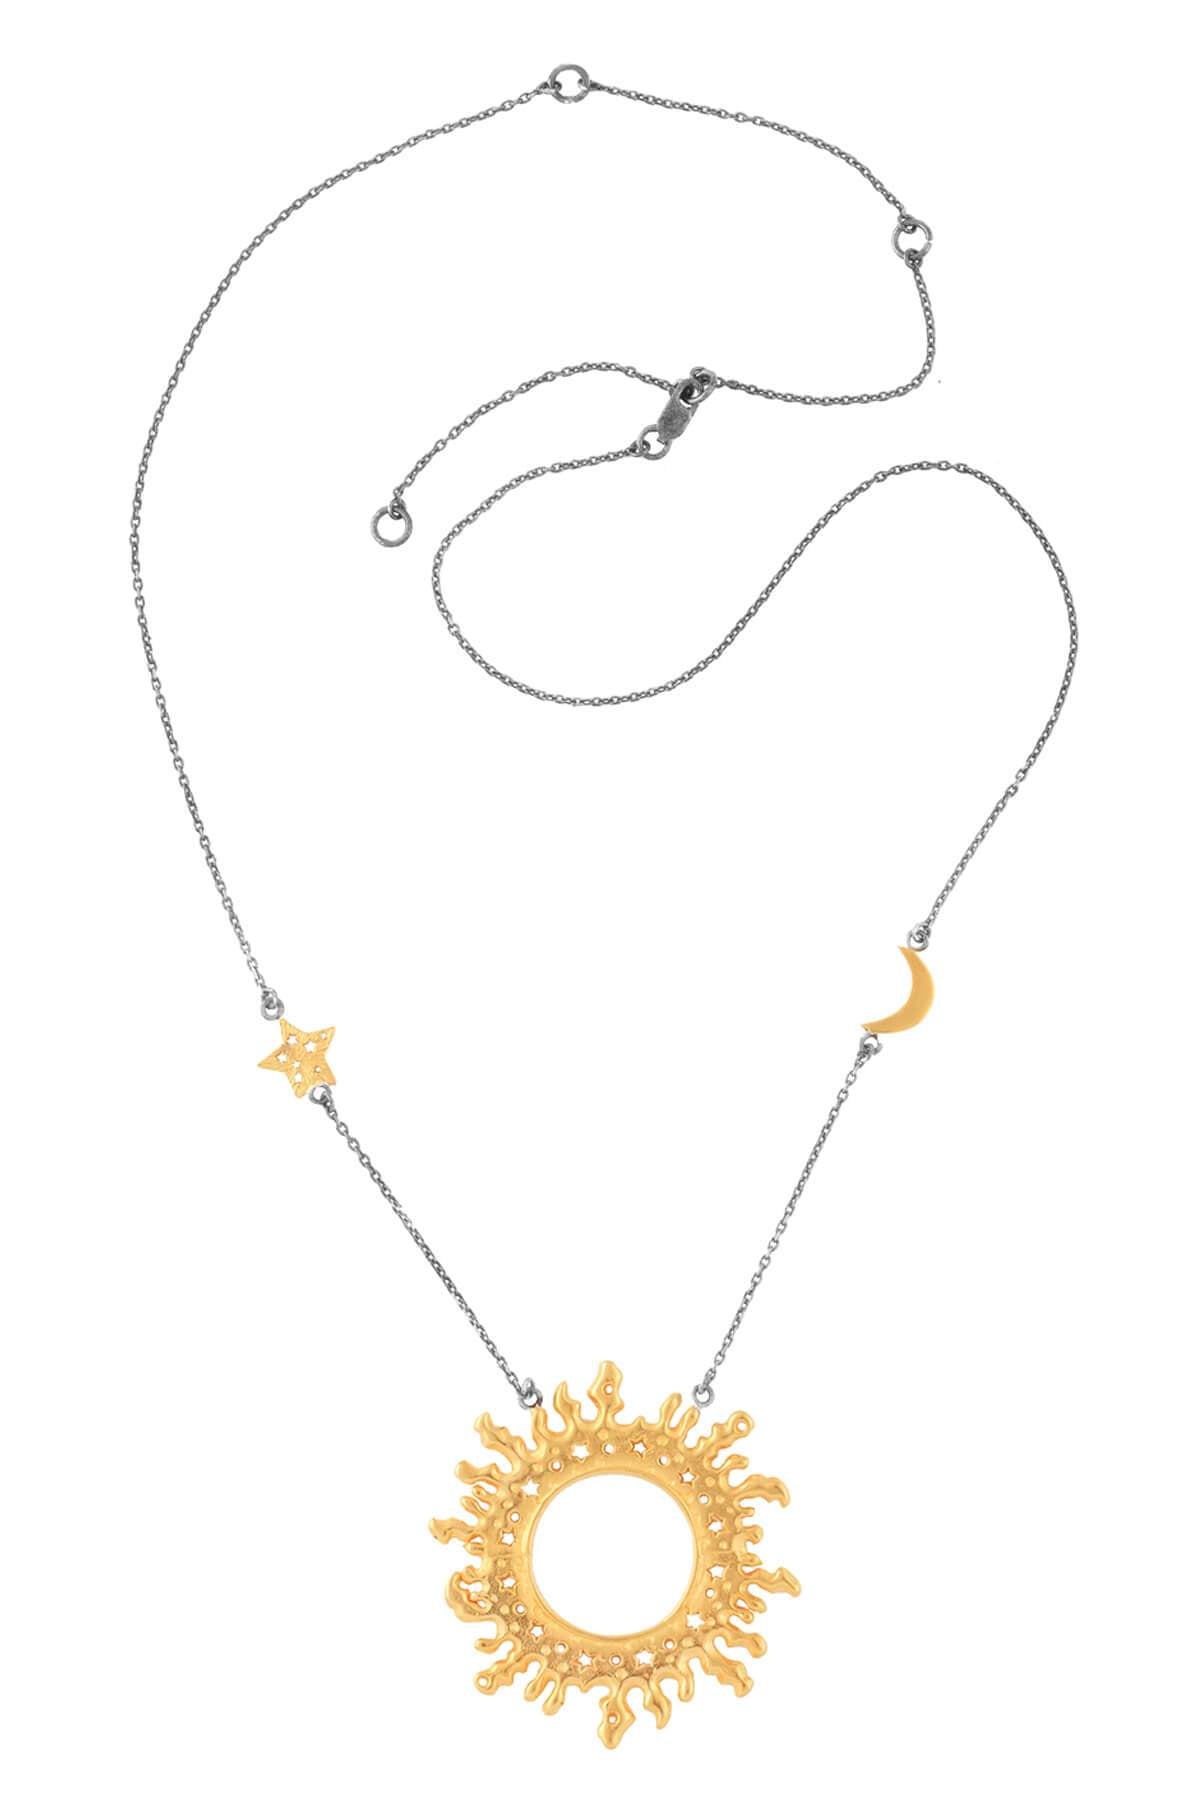 Sun with star and moon on the chain necklace. Silver, partly gold-plated